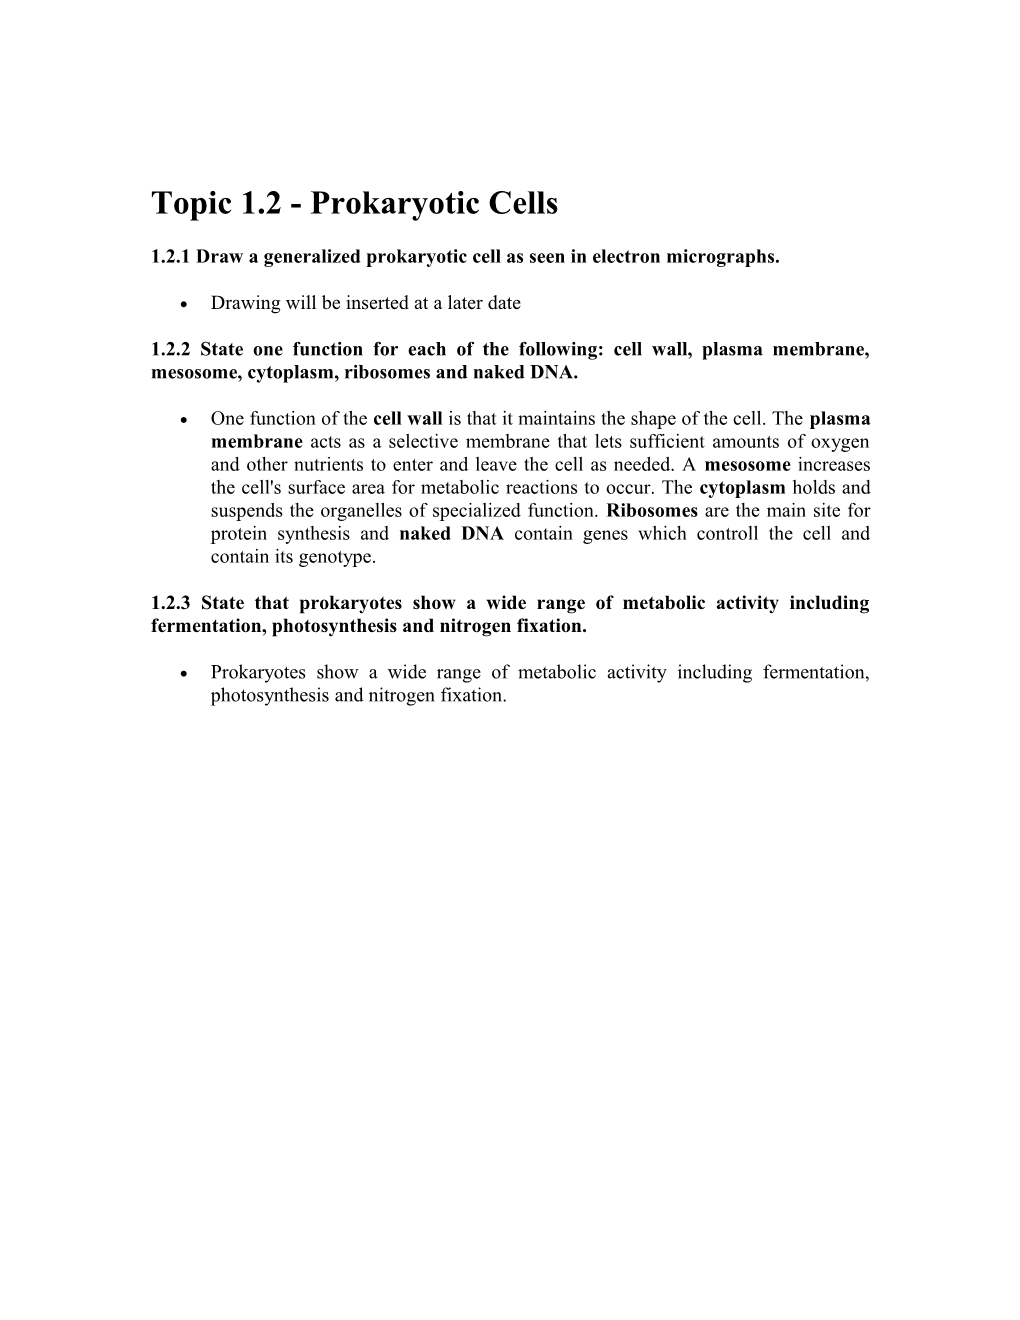 Topic 1.1 - Cell Theory